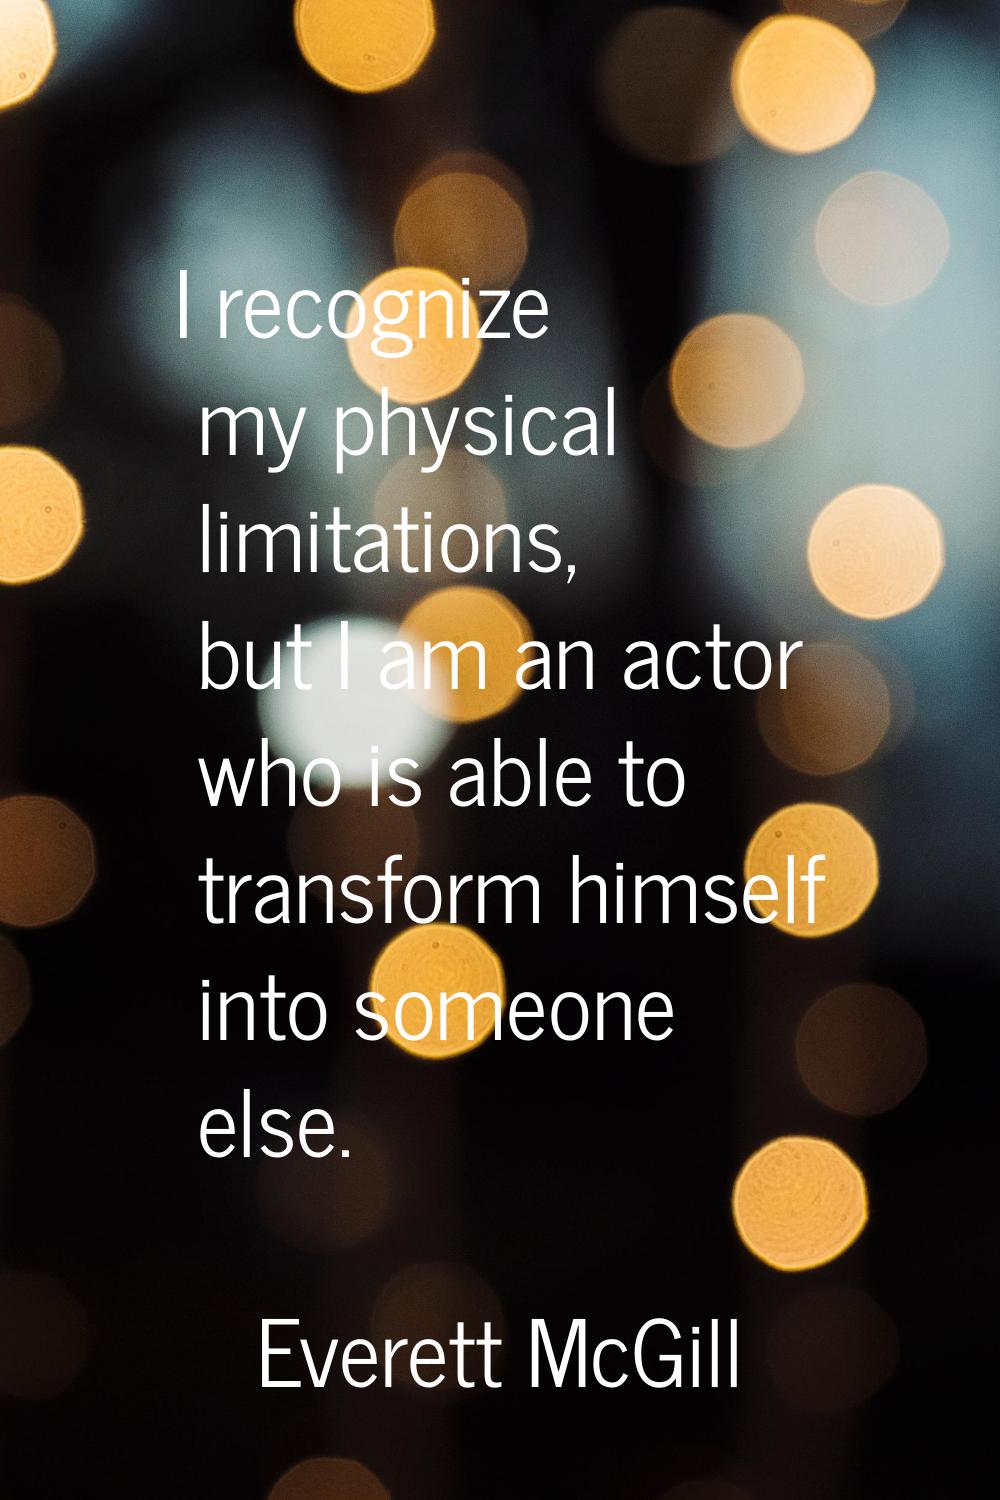 I recognize my physical limitations, but I am an actor who is able to transform himself into someon